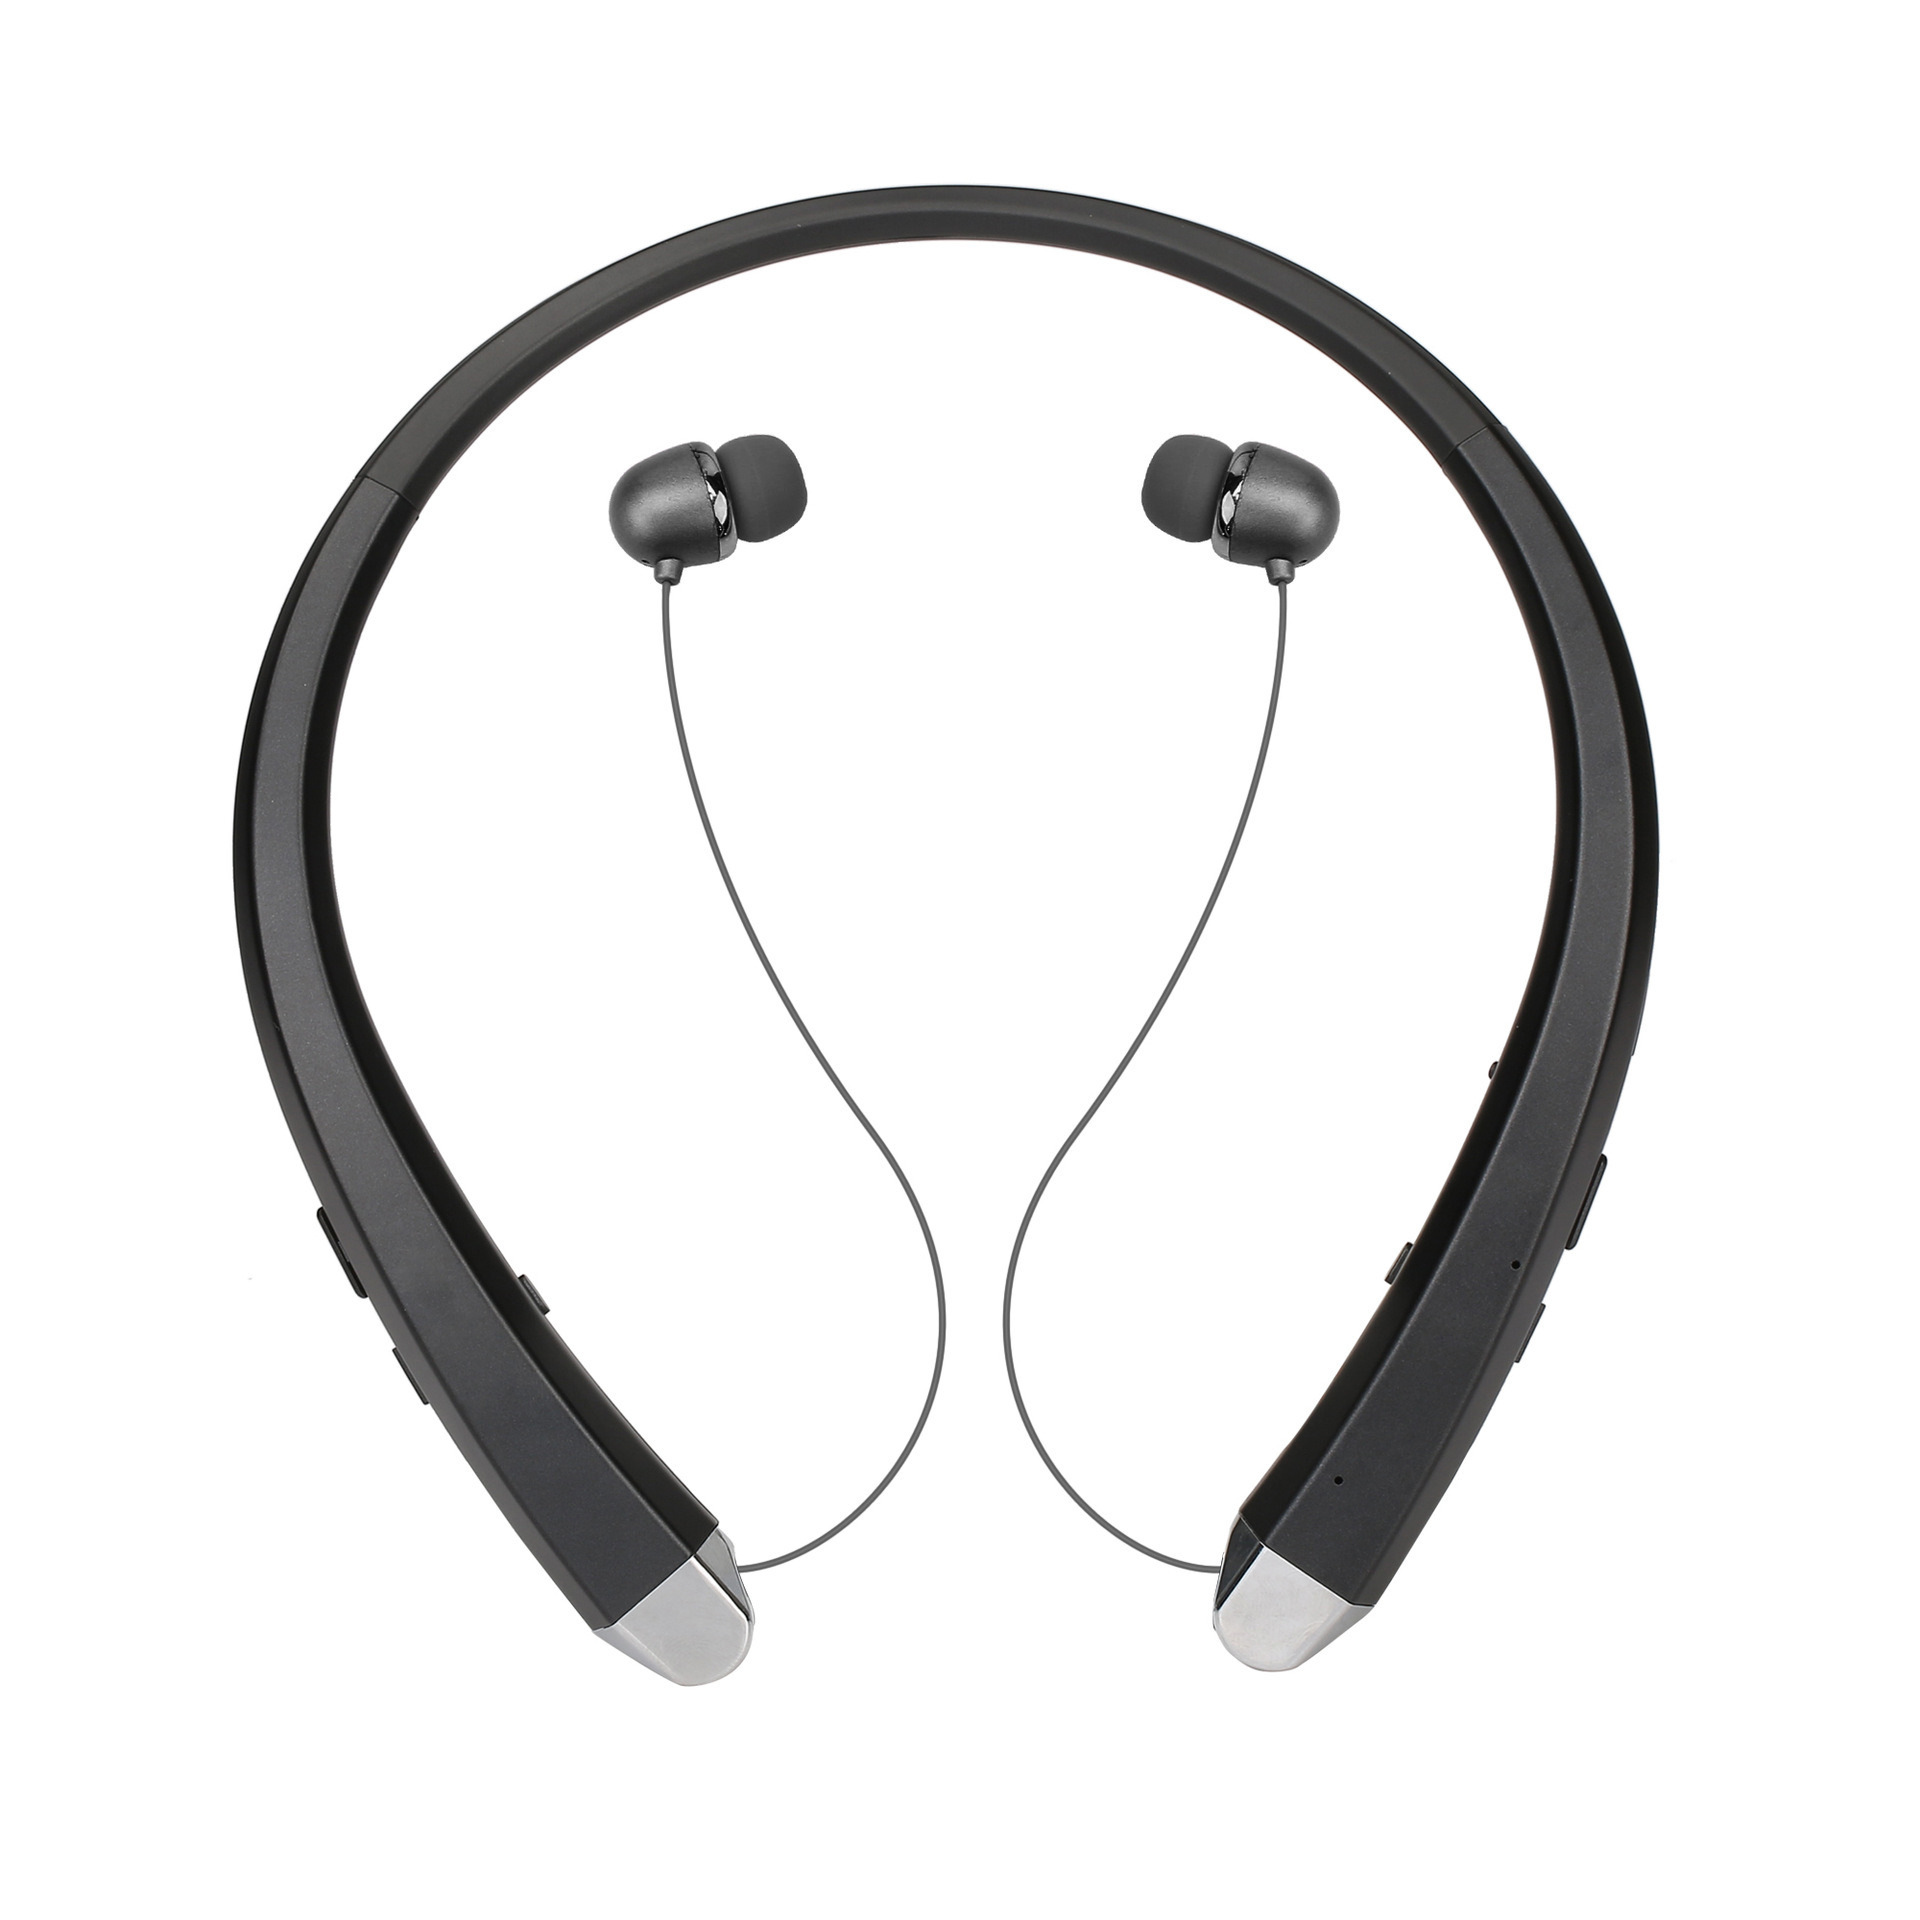 AeroBeat - Your wireless sports headphones for flawless sound and freedom of movement!